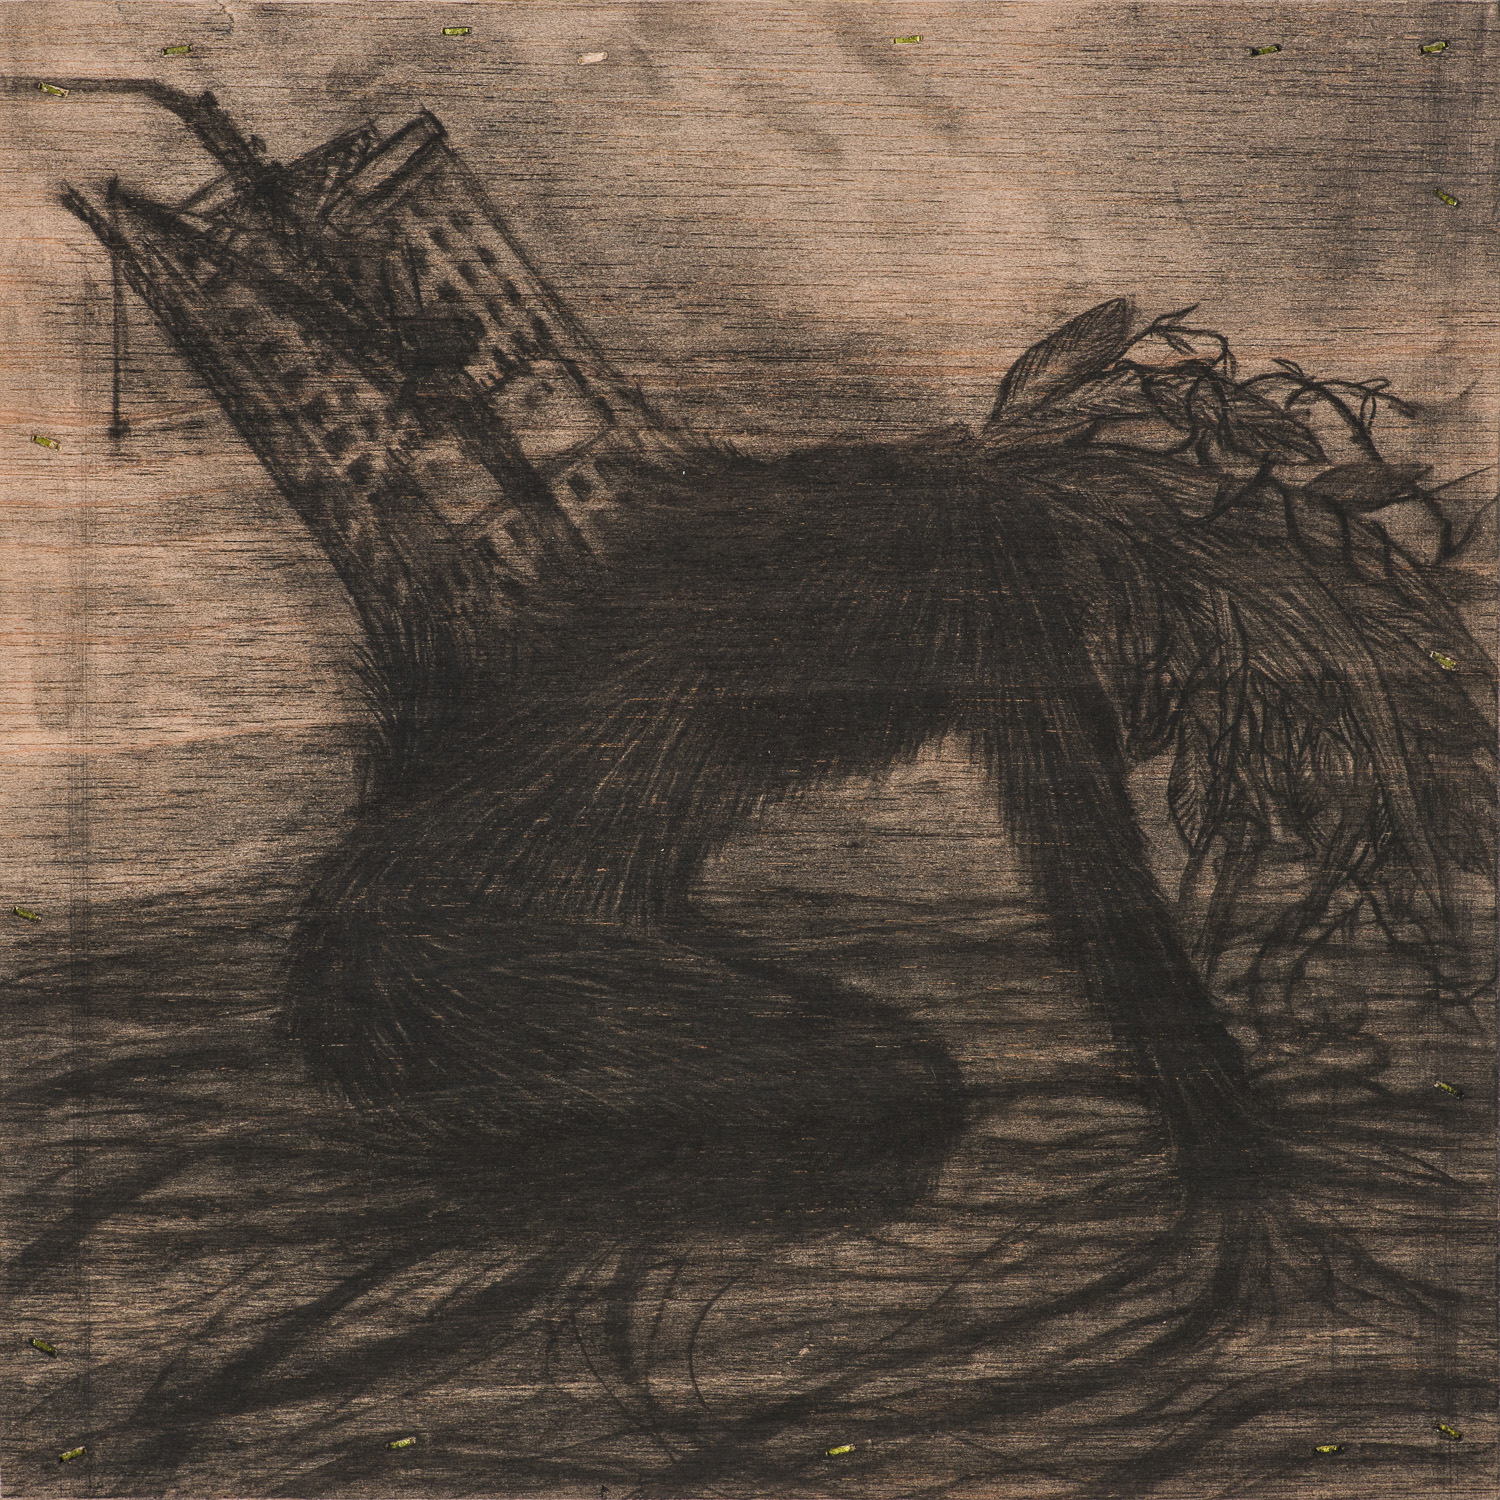 [15p2207] Incessant production_conte on wood board_25×25_2015.jpg